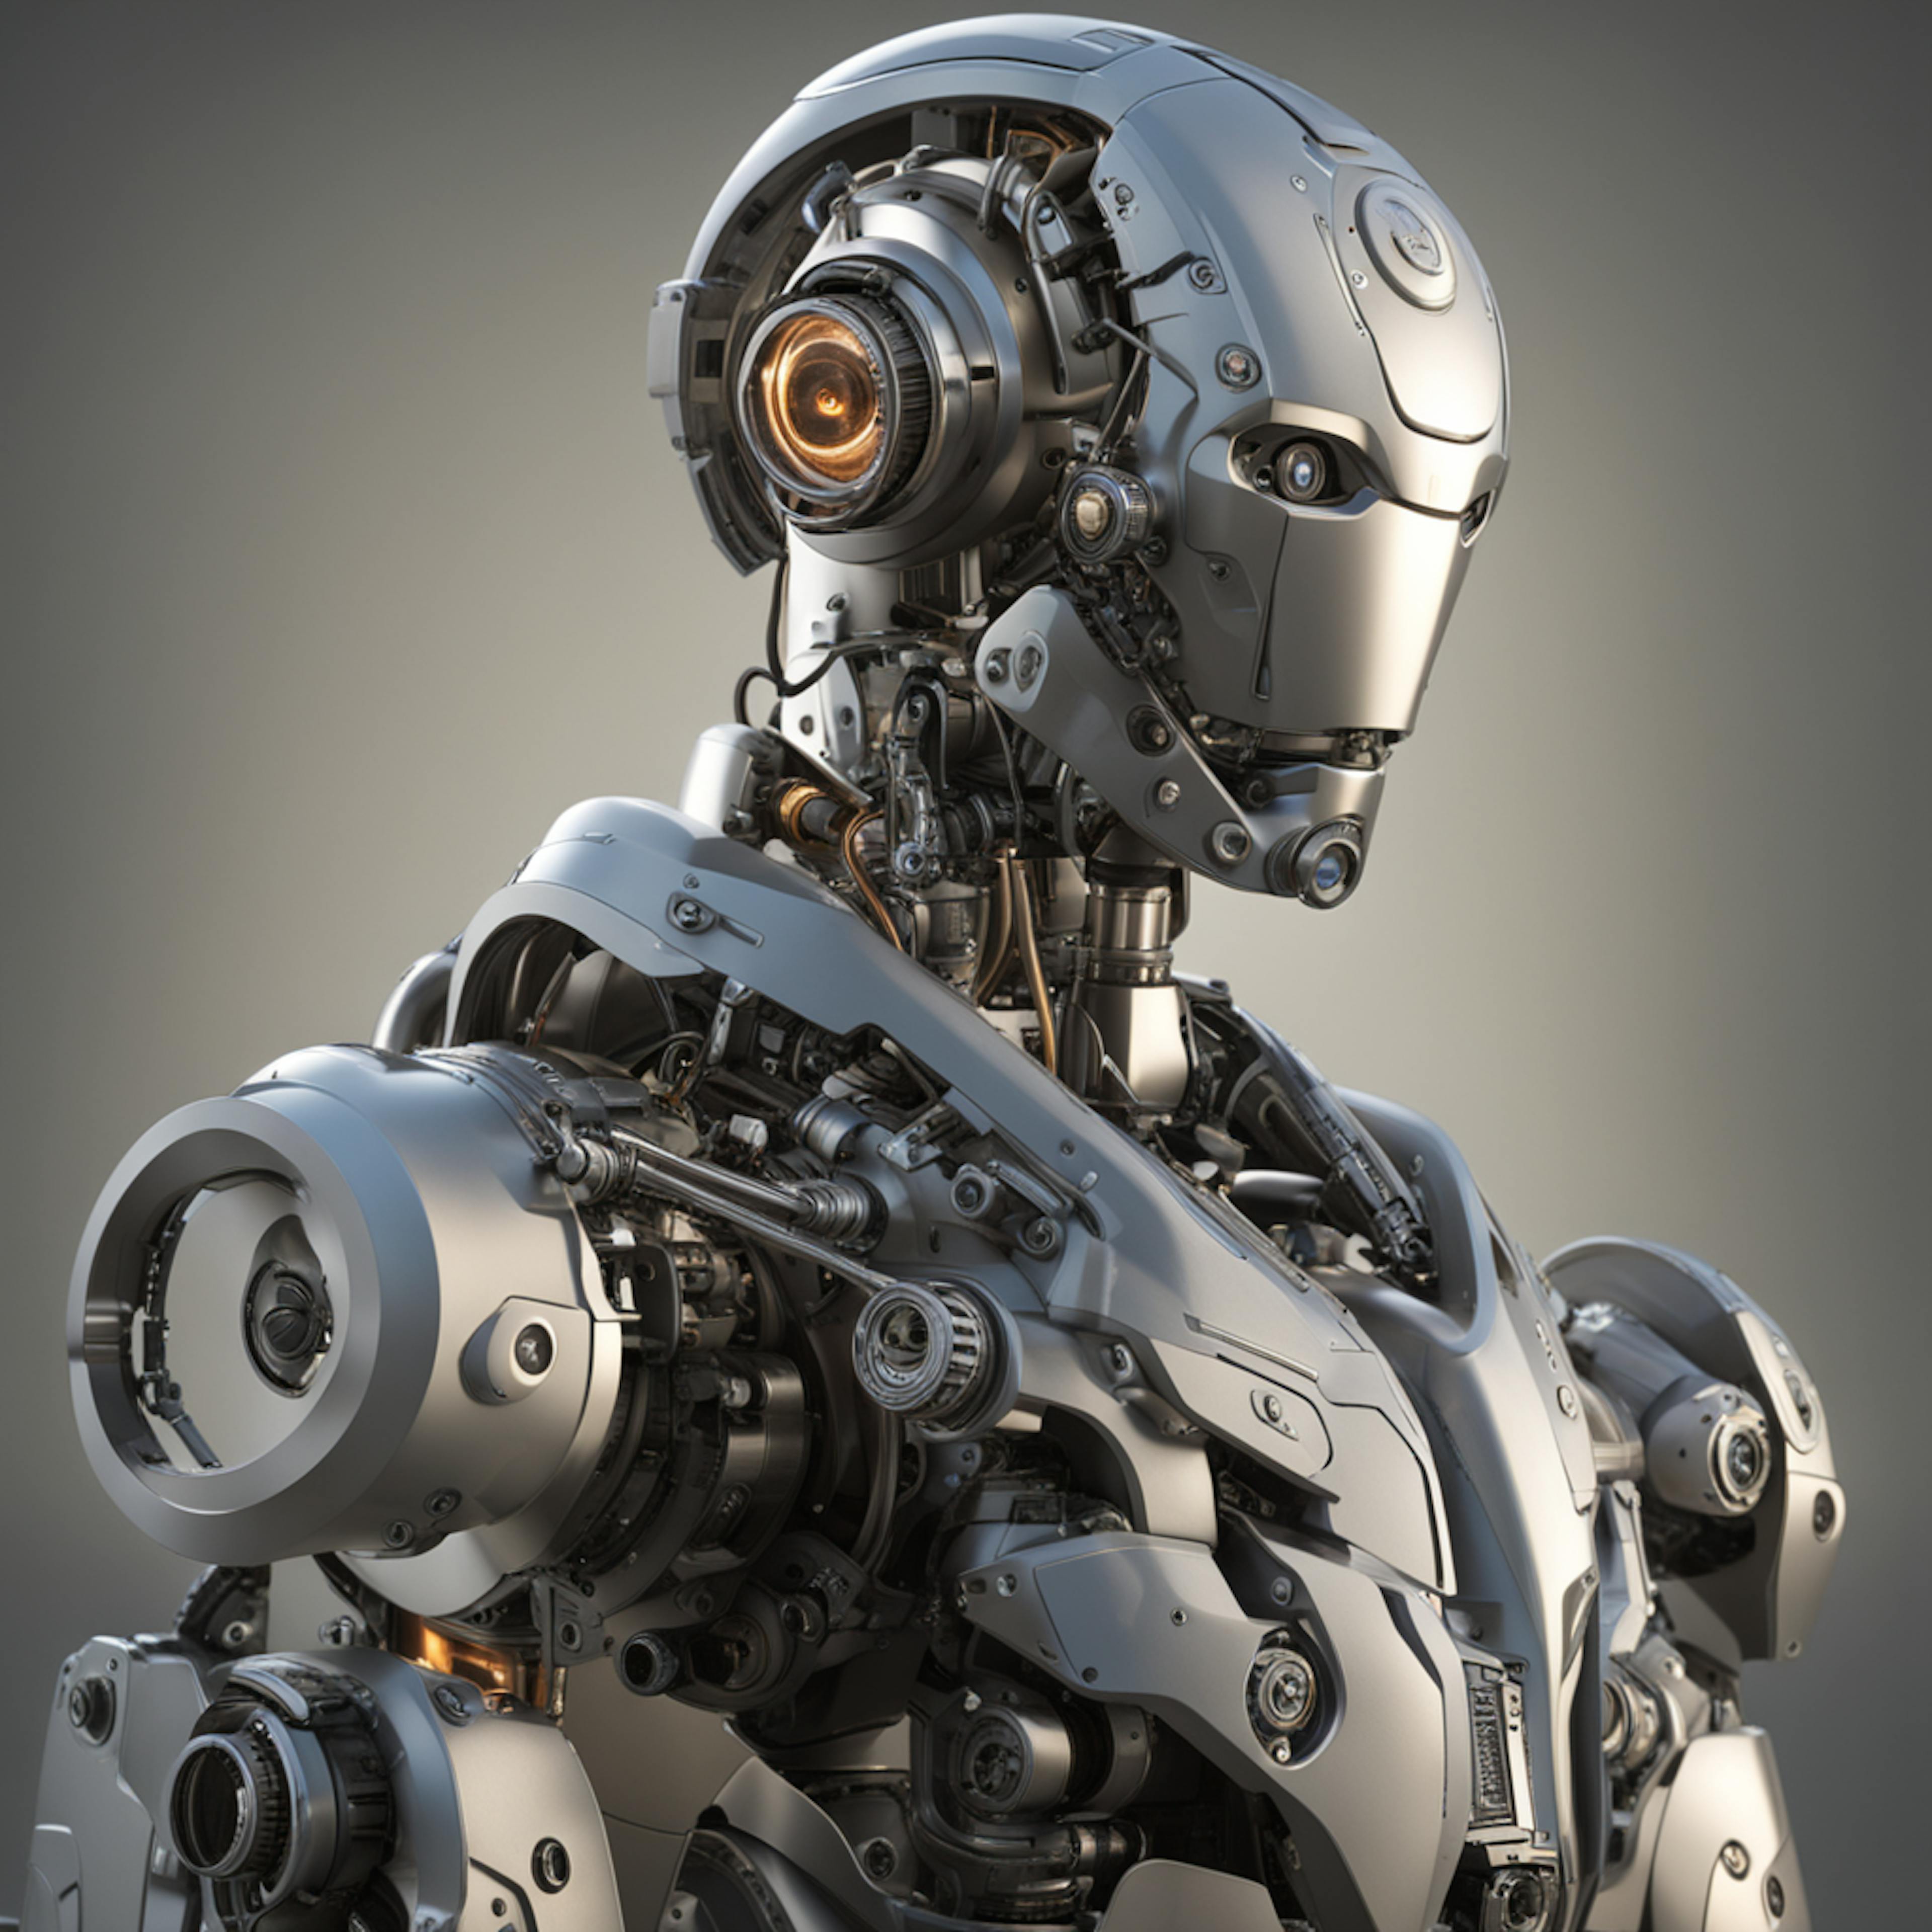 a highly detailed, metallic humanoid robot with intricate mechanical parts, conveying the sophistication of advanced technology. This image exemplifies the capabilities of "generative AI in marketing" to produce detailed and engaging visuals that can captivate and inform potential customers.